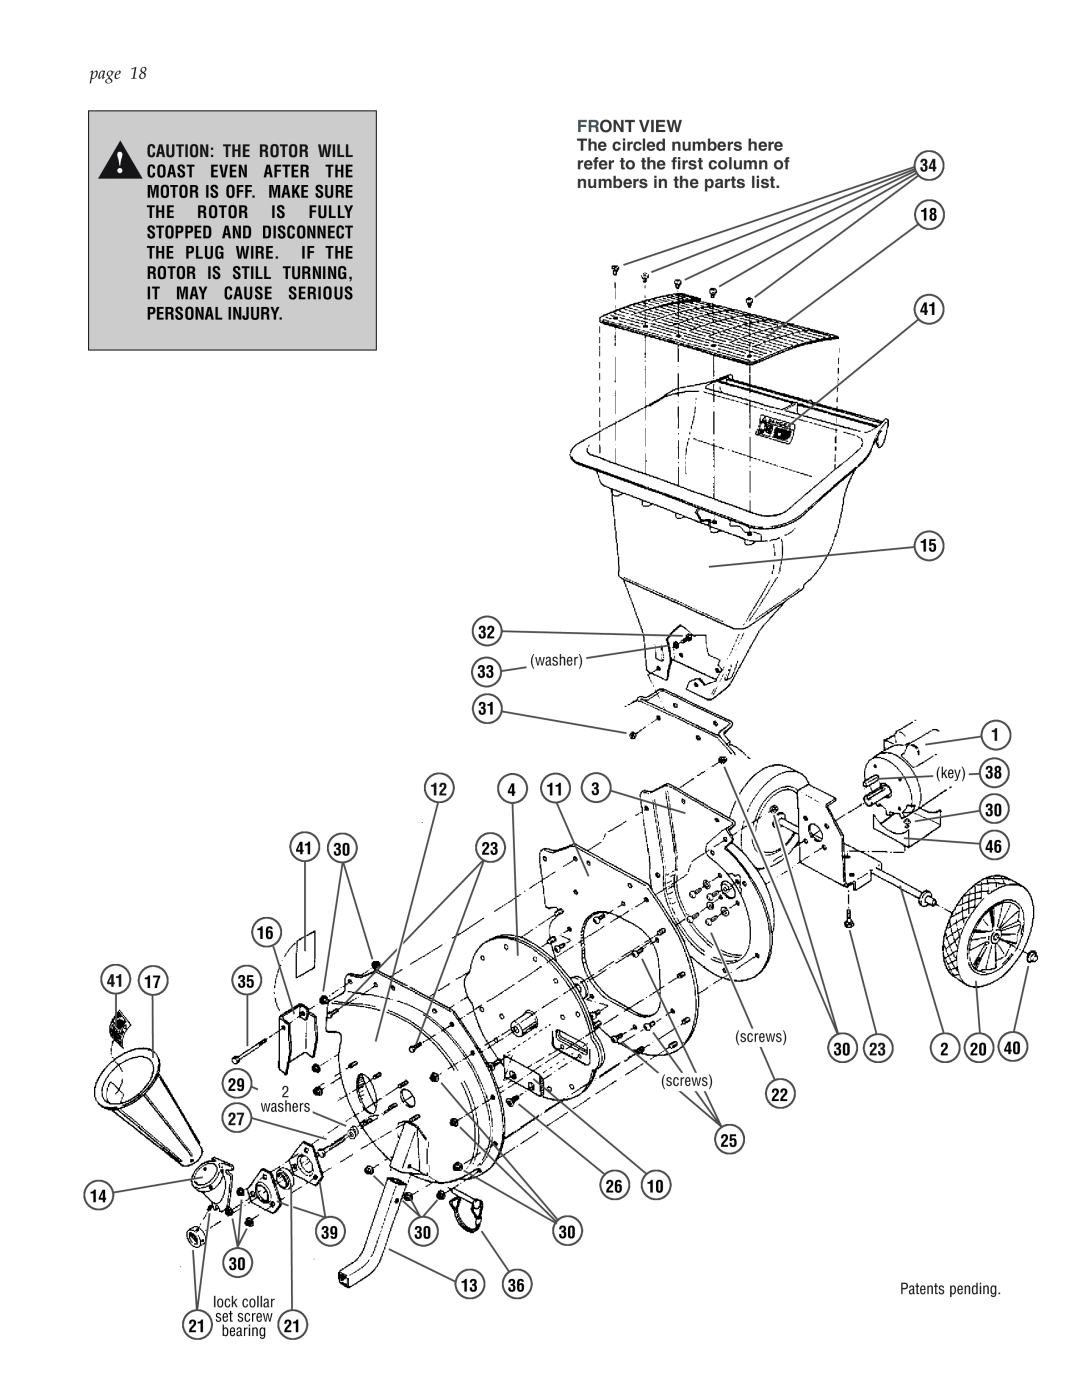 Patriot Products Electric Motors manual page, Caution The Rotor Will, Front View, 12 4, 1 key, 3030, 29 2 washers, screws 